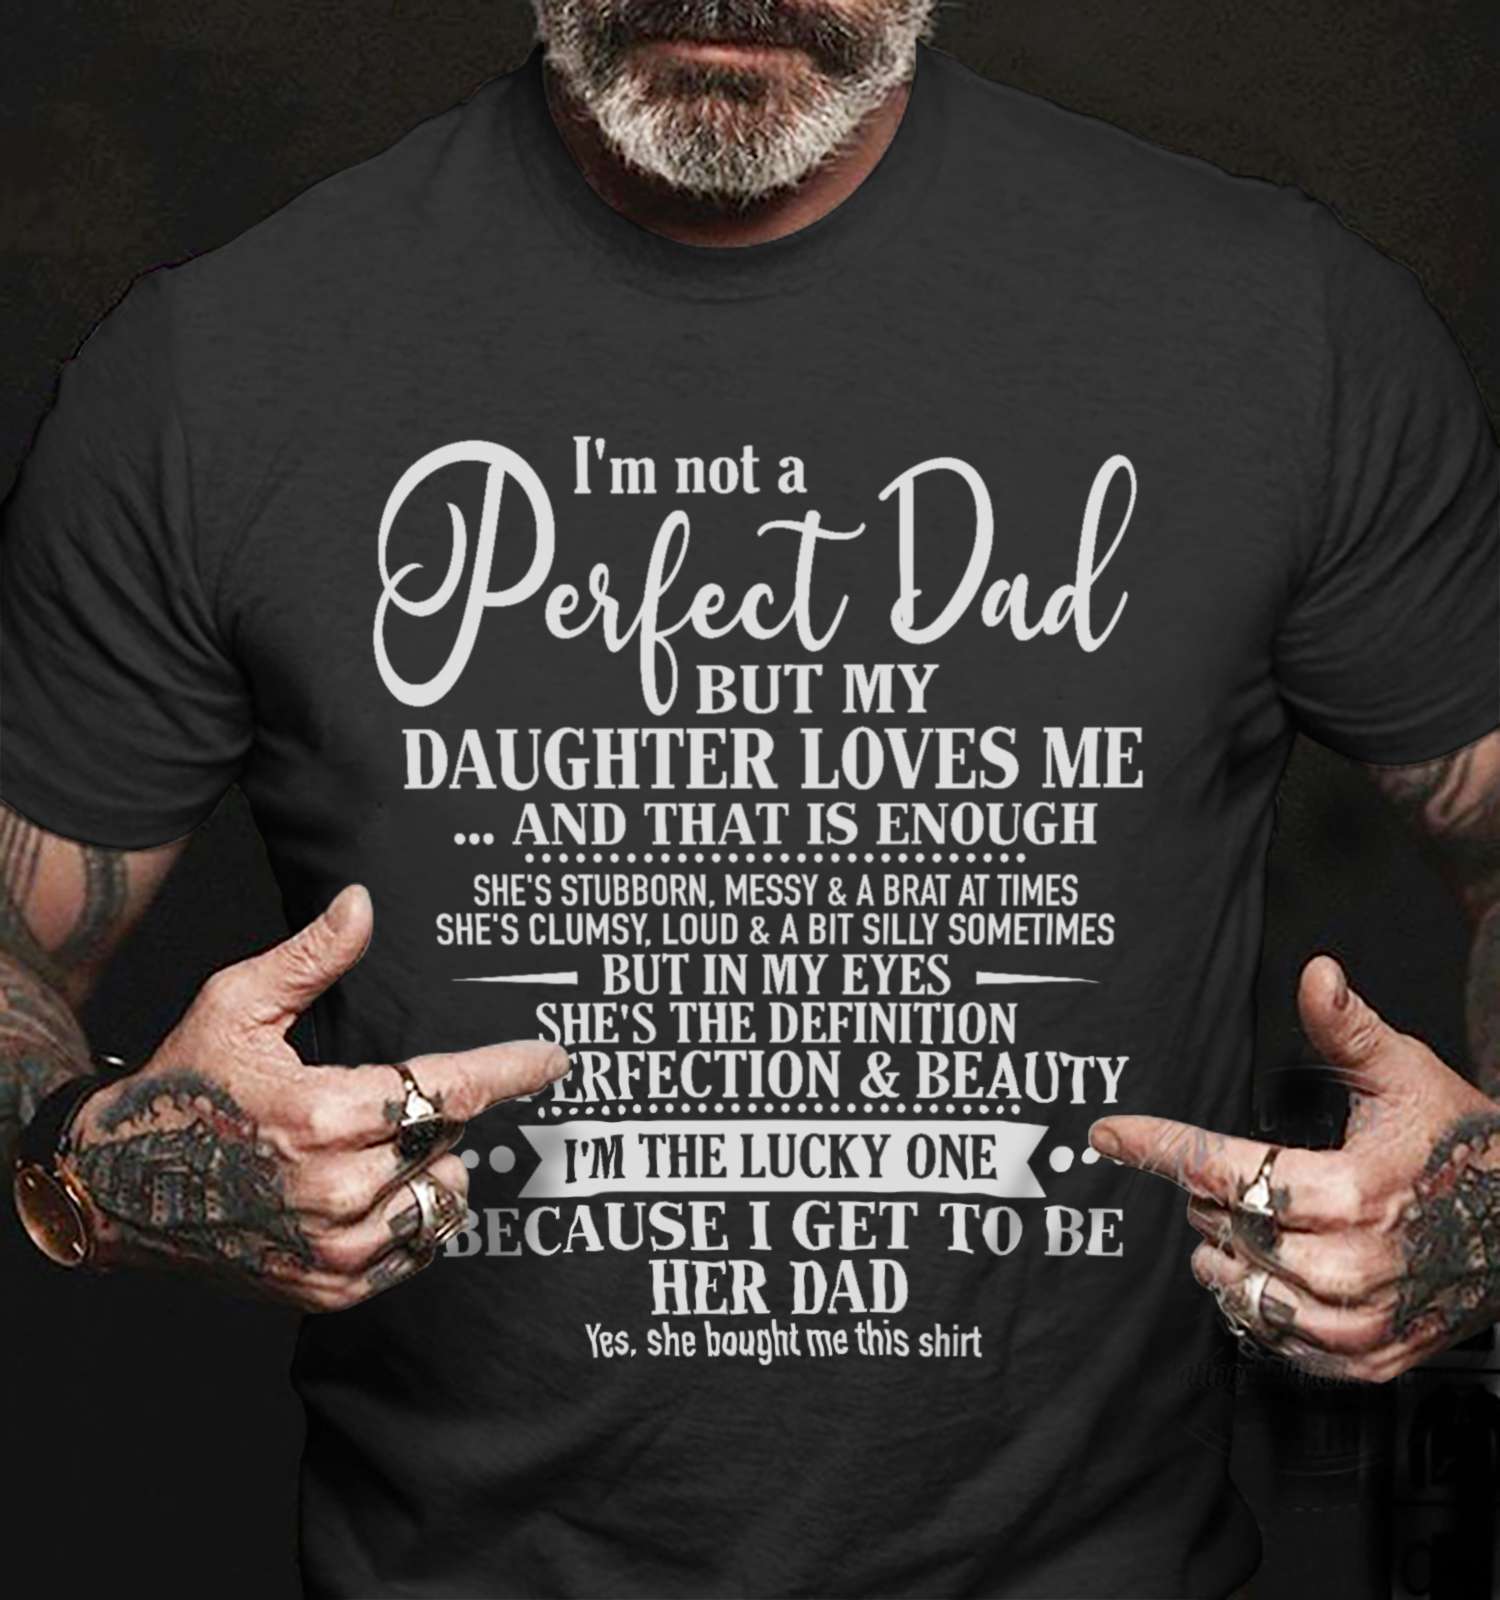 I'm not a perfect dad but my daughter loves me and that is enough o'm the lucky one because i get to be her dad